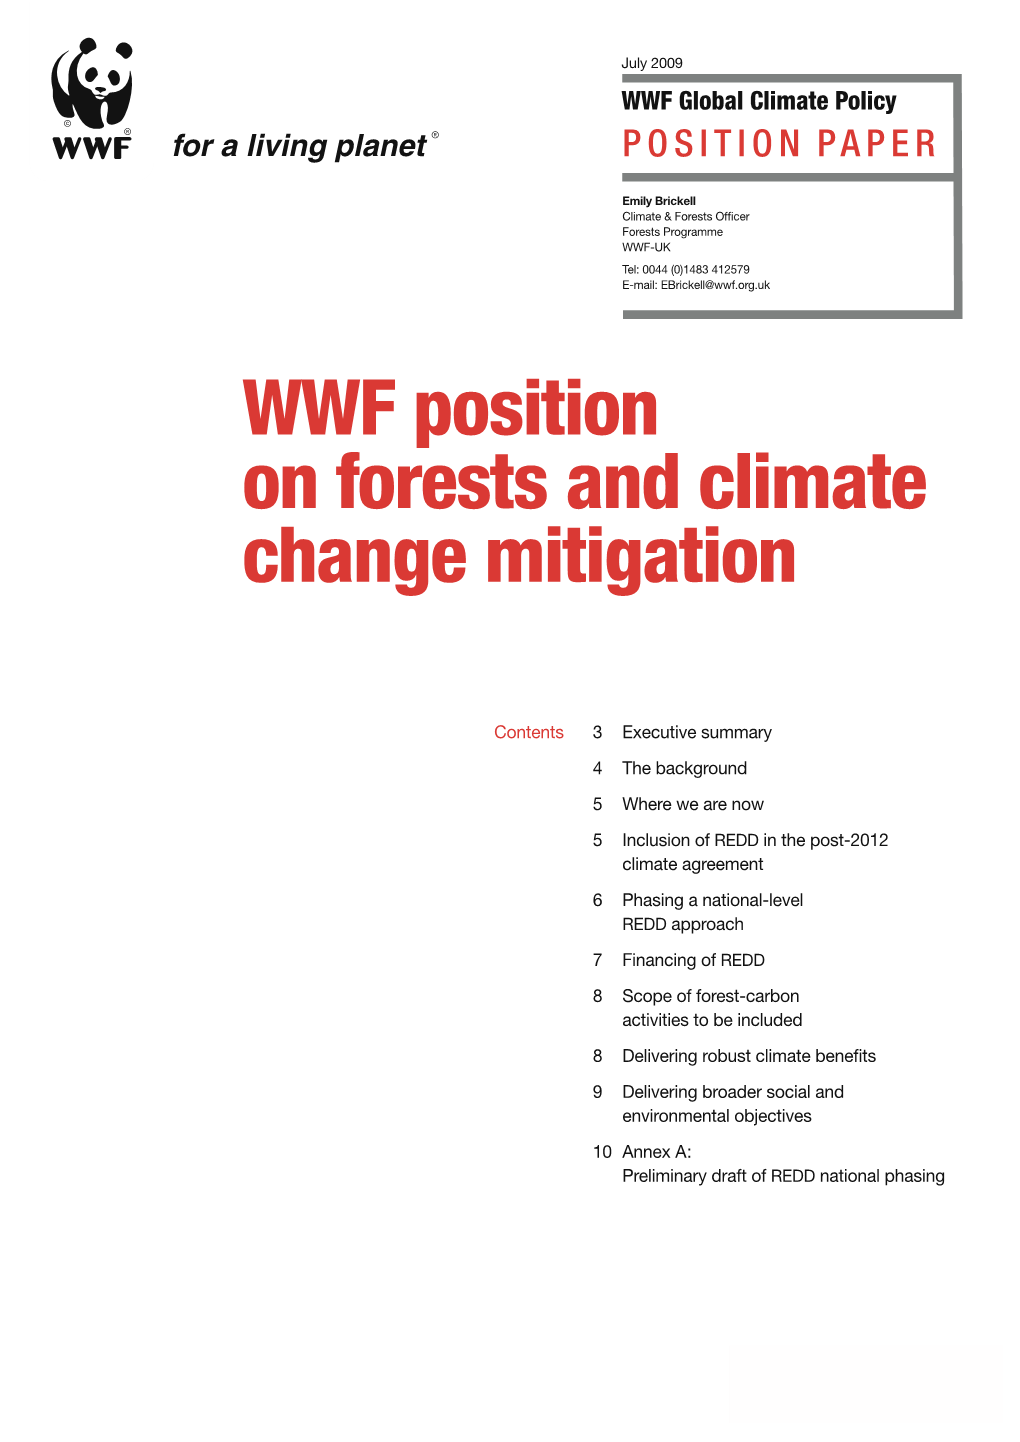 WWF Position on Forests and Climate Change Mitigation